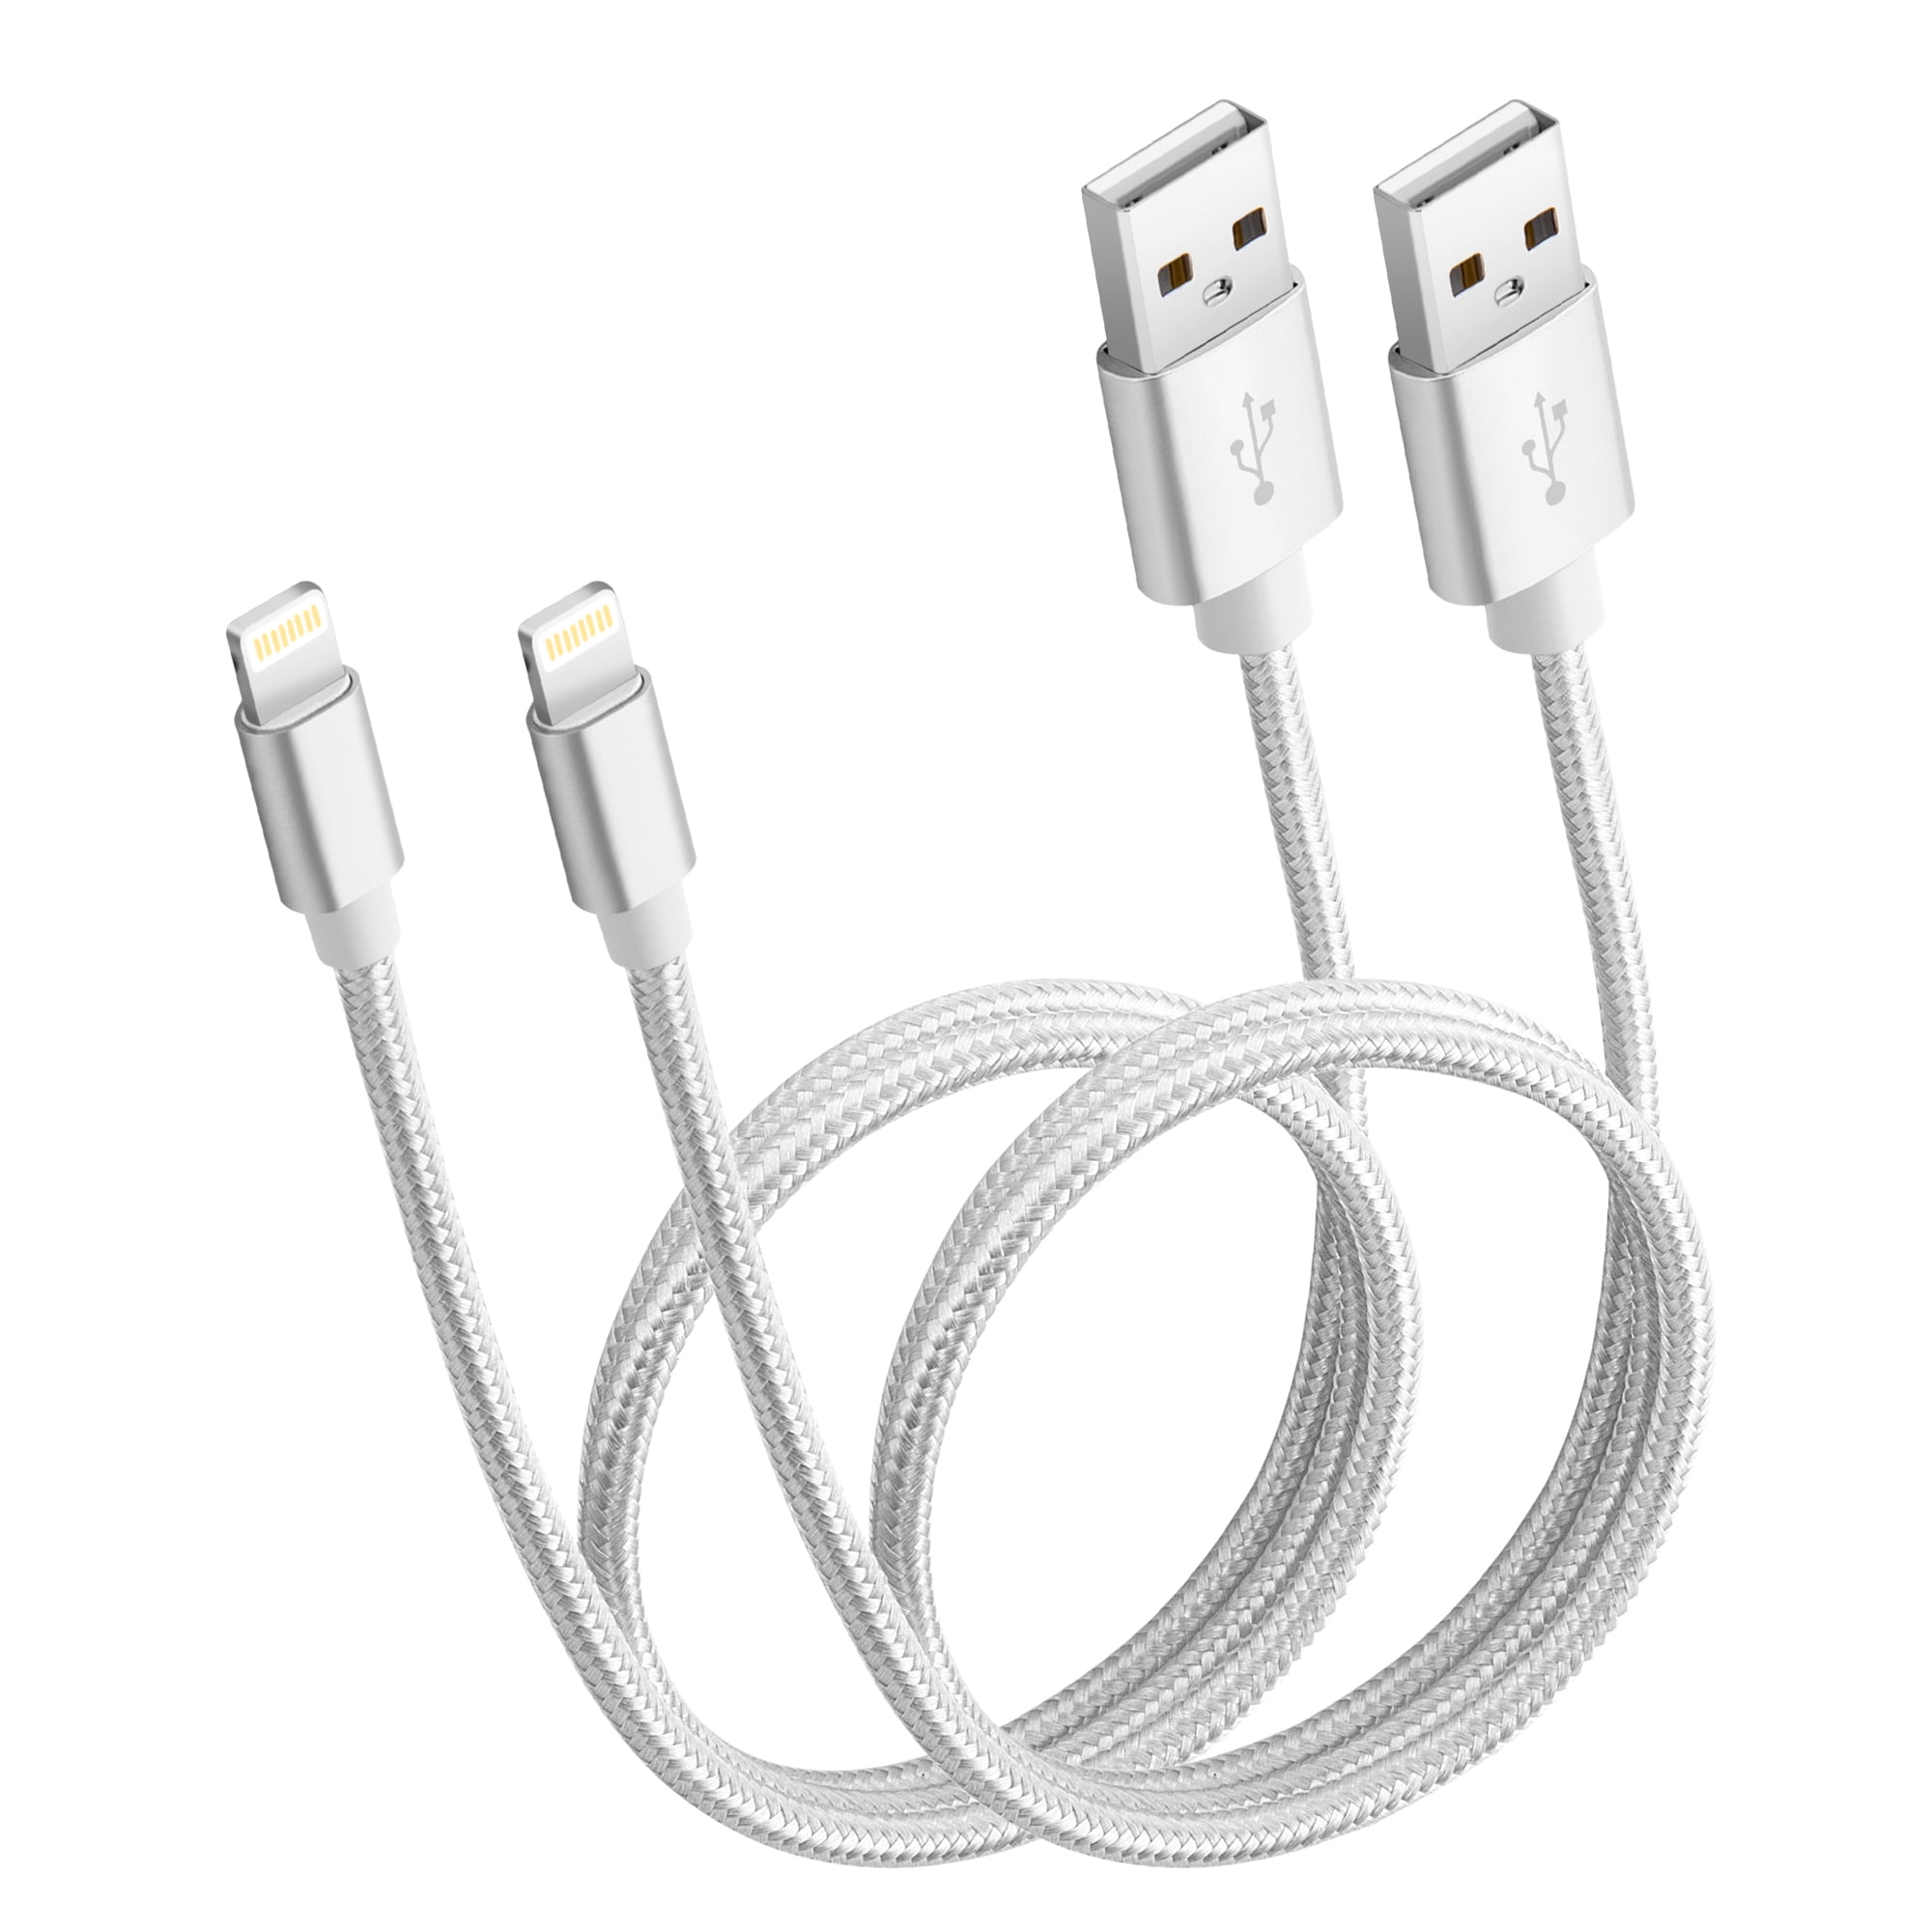 Cargador Cable iPhone Original 2m iPhone 11 Pro Y Max Xs Xr - FEBO